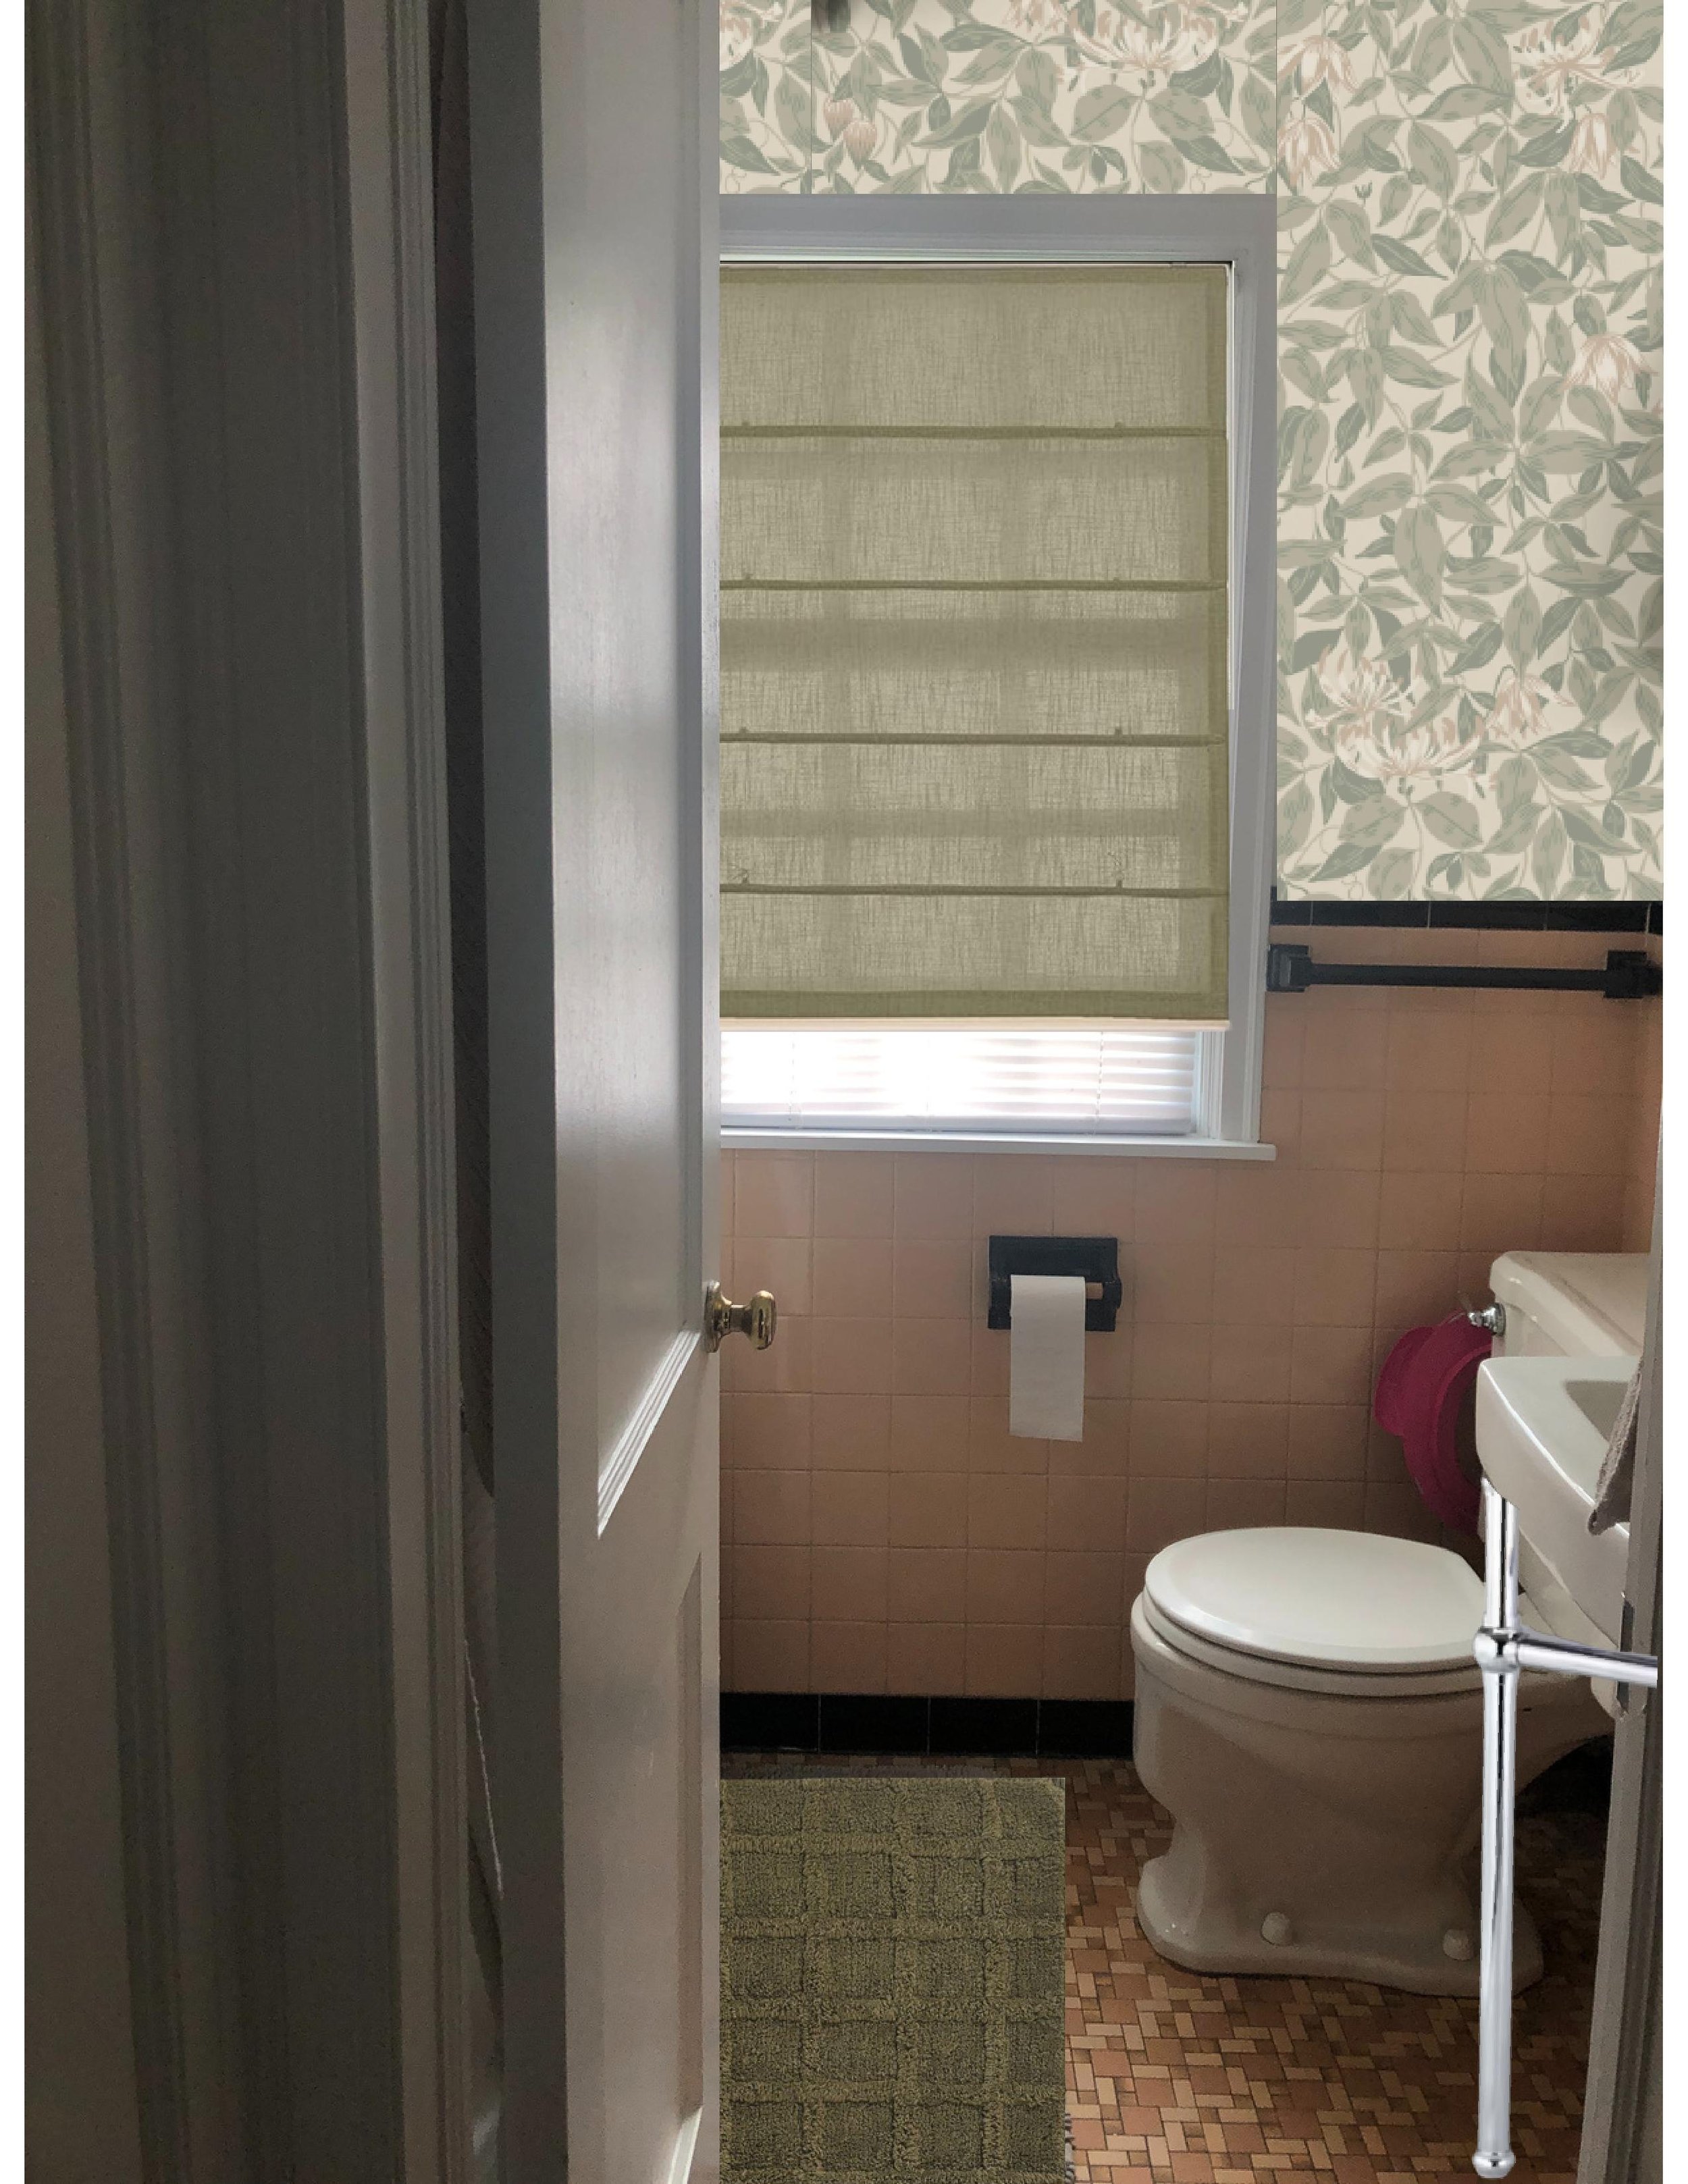 How to update a pink and black retro bathroom without changing the tile. 1920's bathroom makeover with botanical wallpaper, chrome accents, linen roman shades, and an olive green bath mat. | Nadine Stay